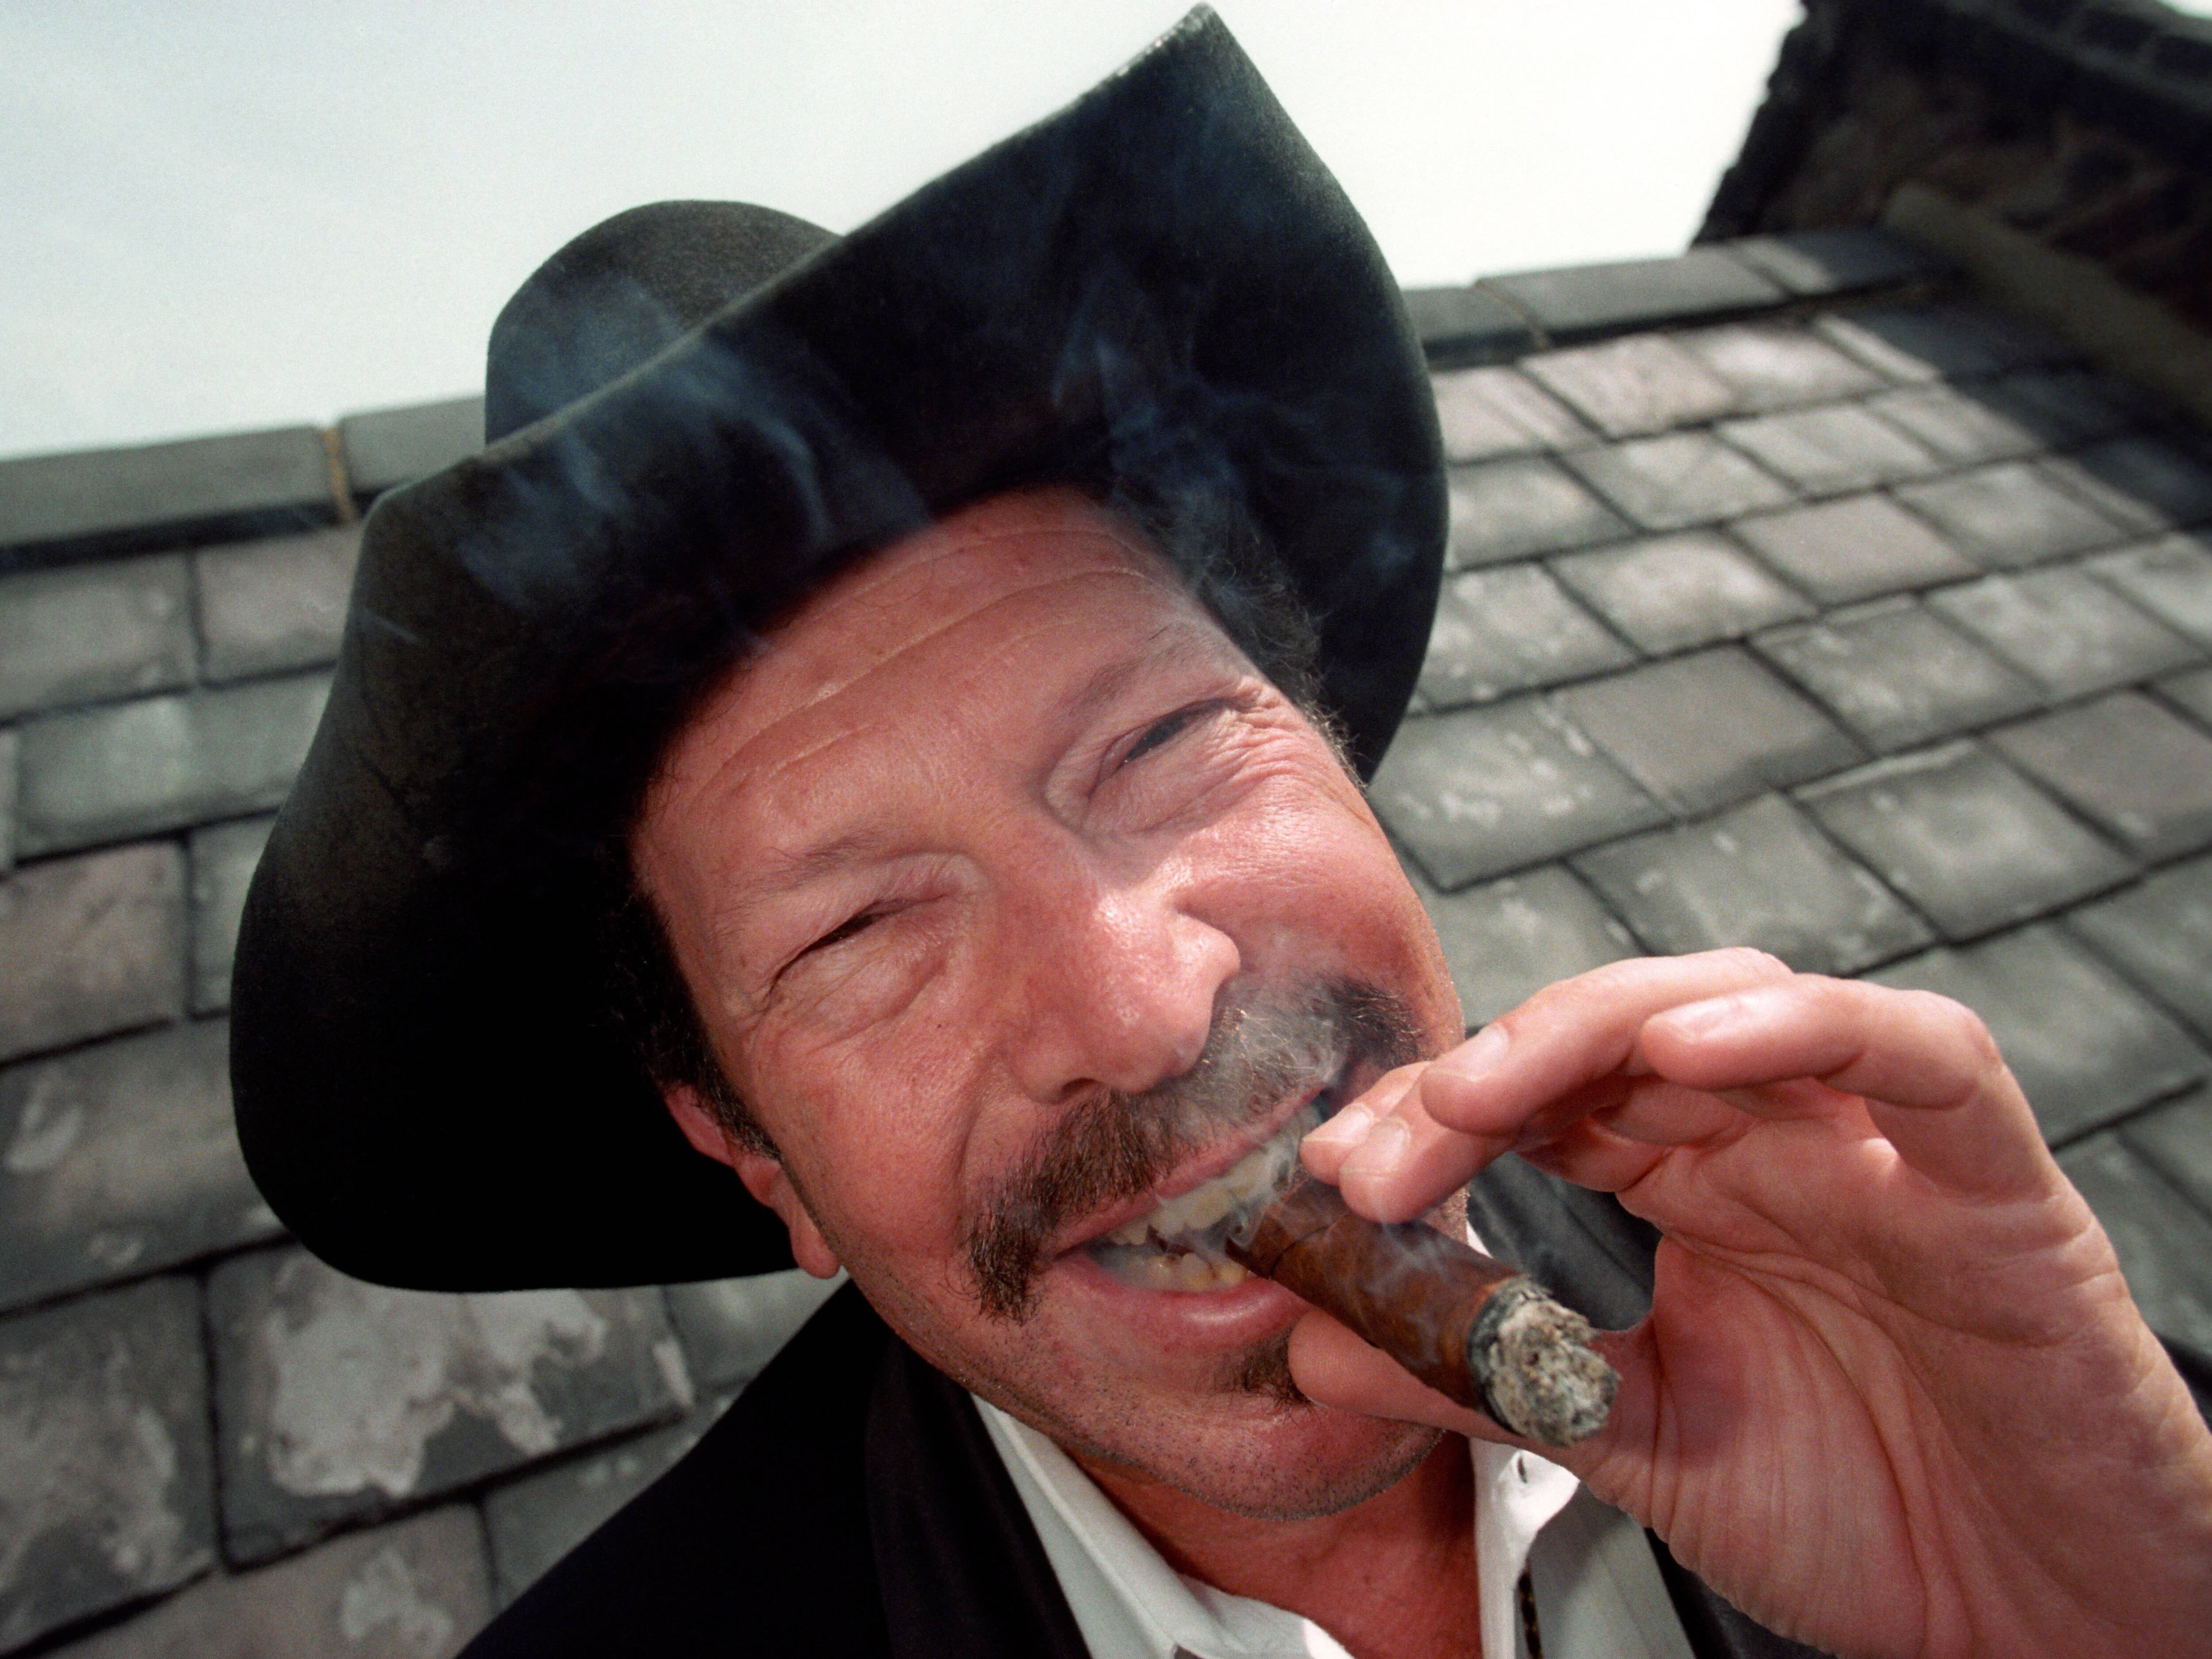 Singer, writer and politician Kinky Friedman dies aged 79